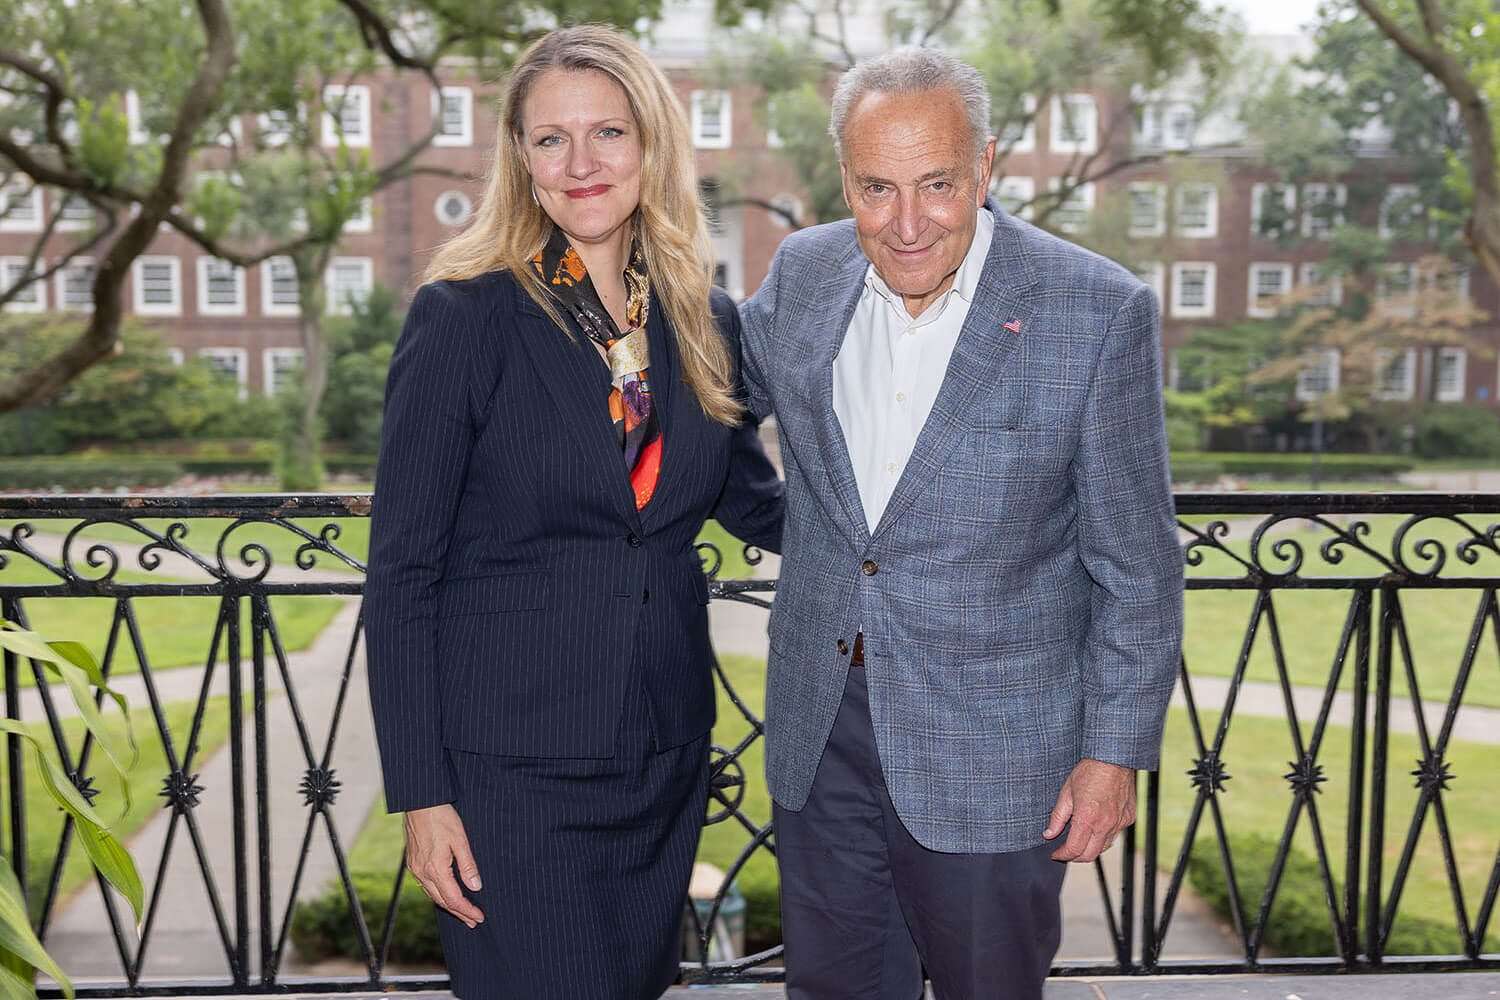 President Michelle J. Anderson welcomes Senate Majority Leader Charles E. Schumer to campus.